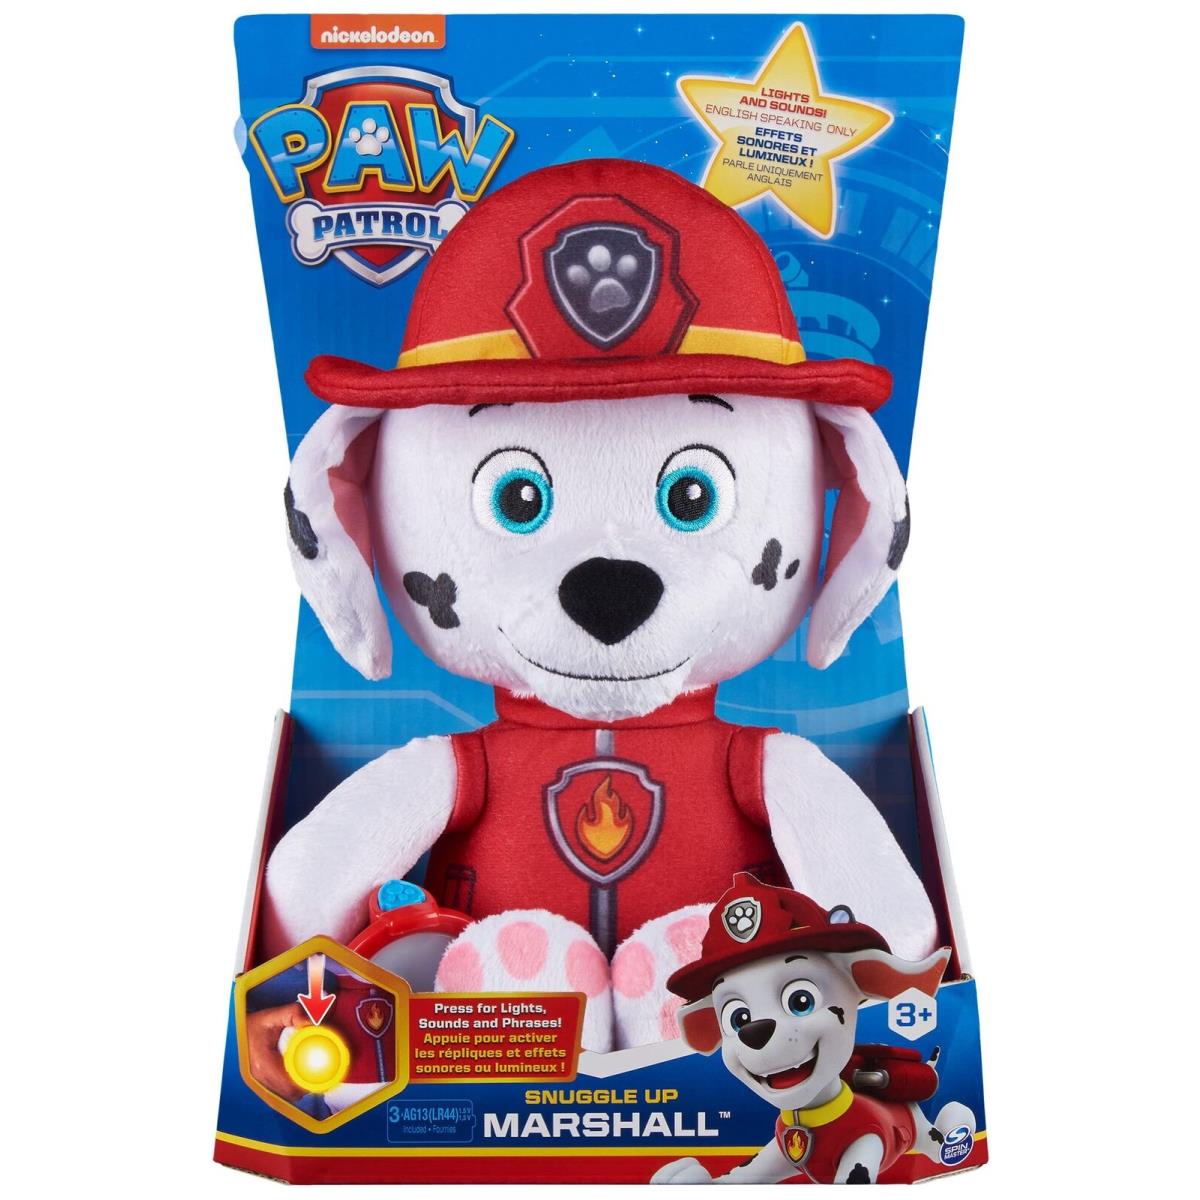 Paw Patrol Snuggle Up Marshall Plush with Flashlight and Sounds For Kids Aged